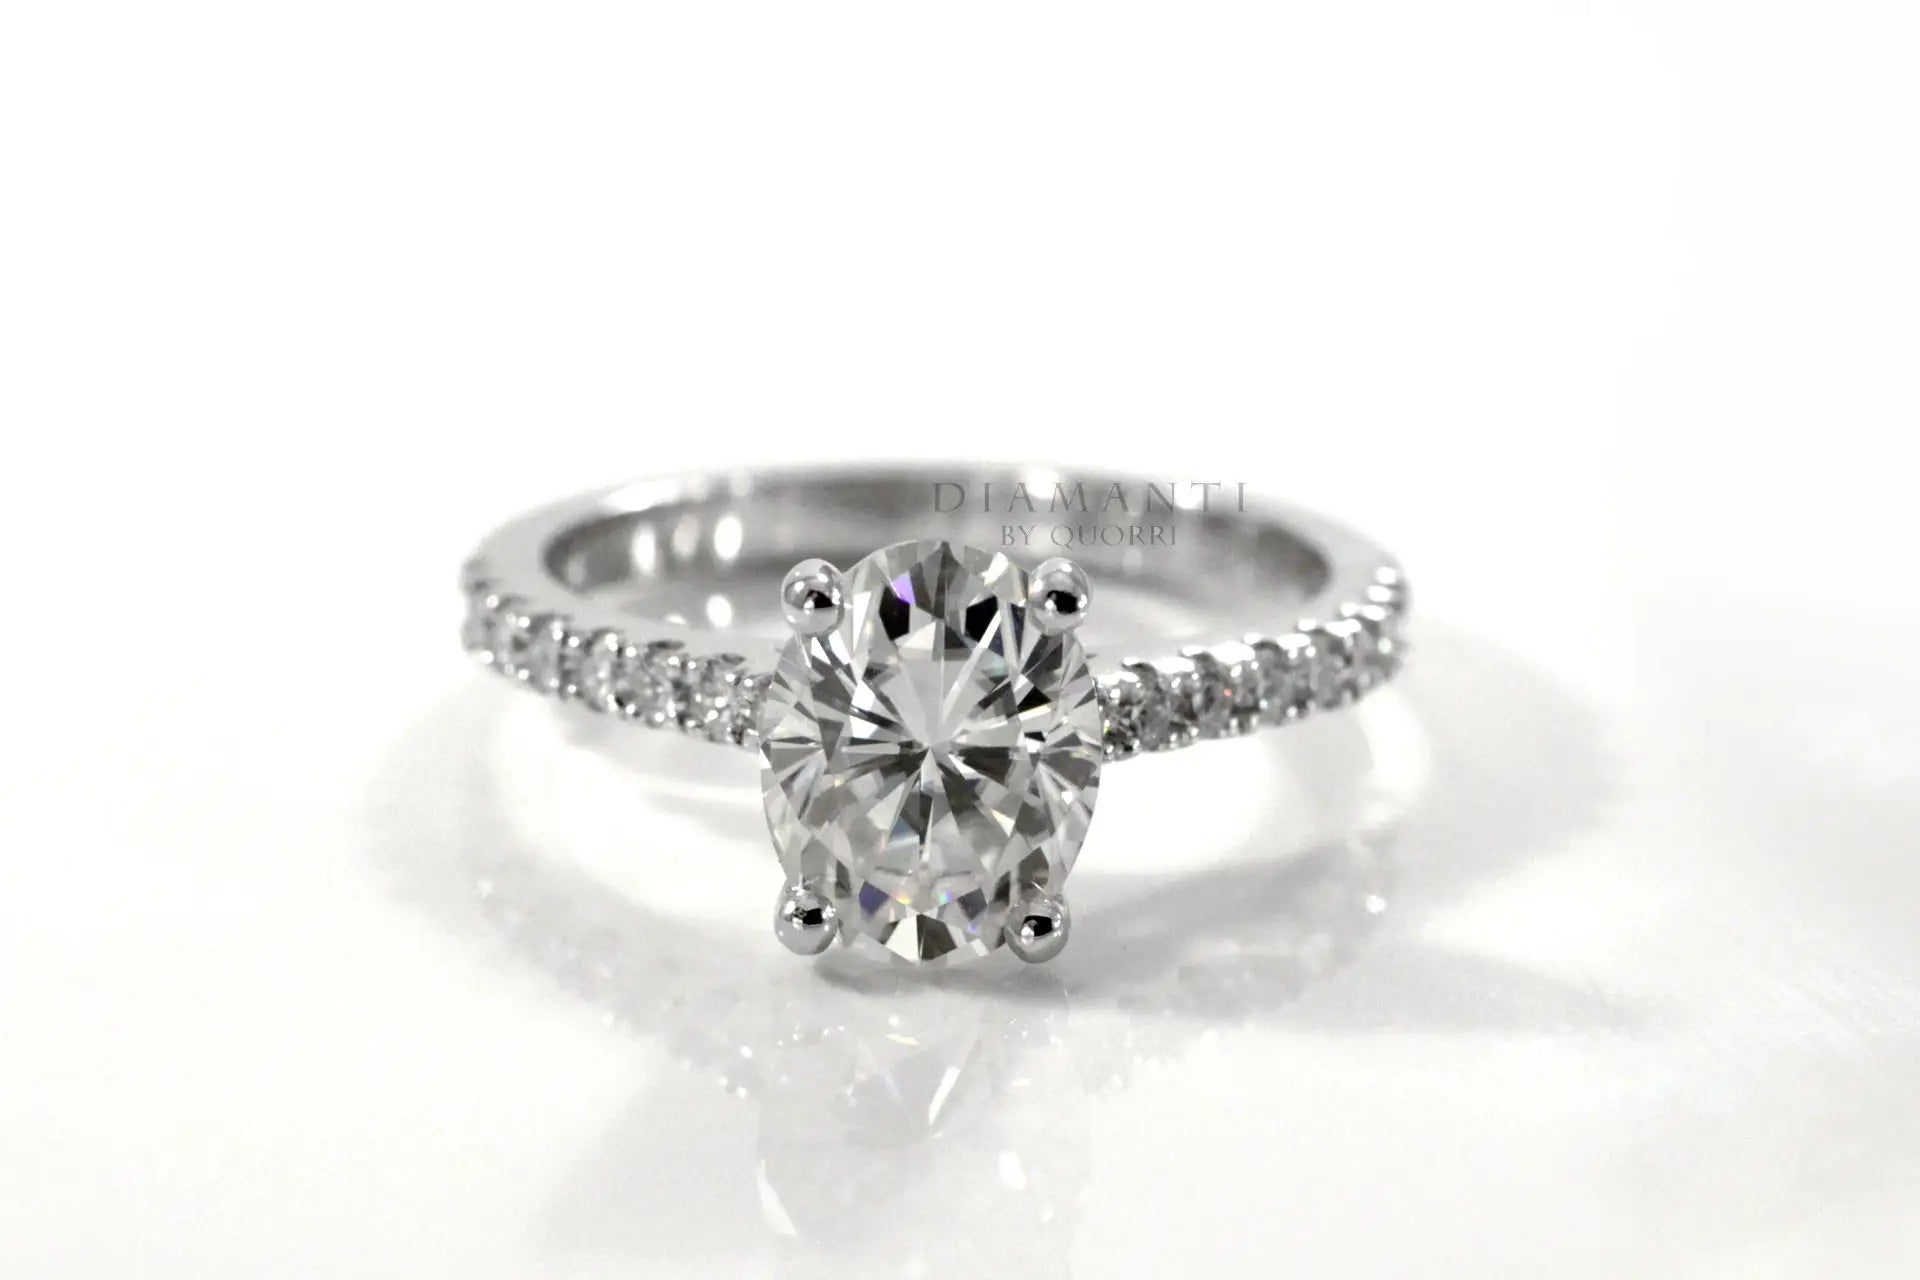 18k white gold affordable accented 2.5 carat oval lab diamond engagement ring Quorri